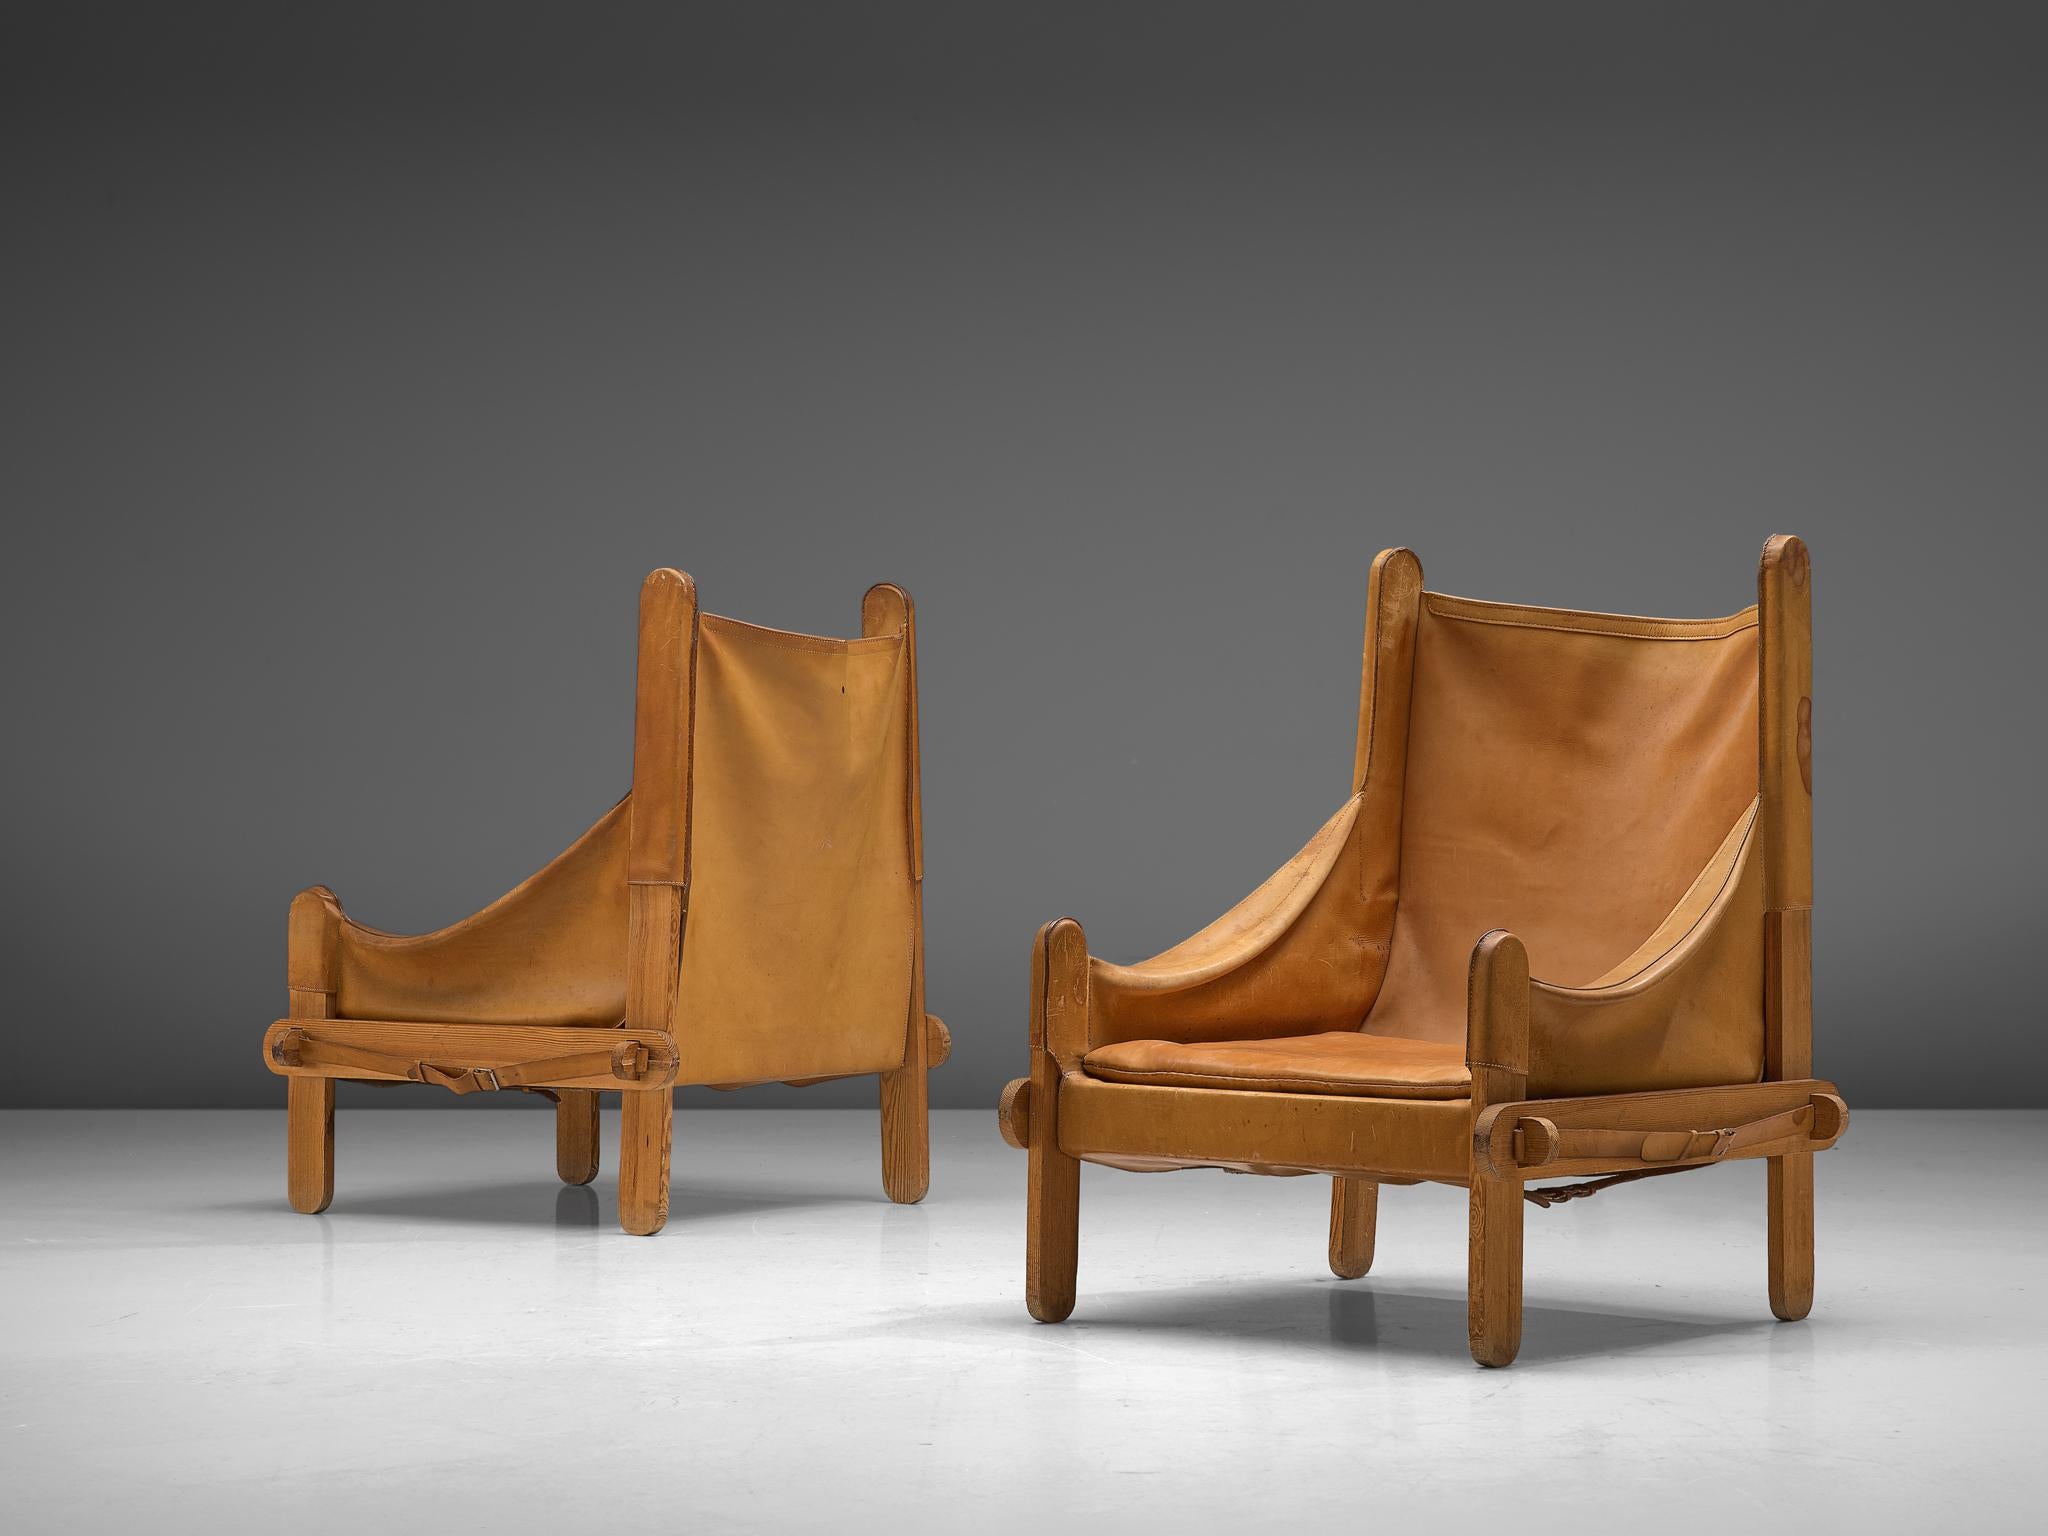 Armchairs, leather, wood, France, 1950s.

These lounge chairs holds a solid crafted frame with characteristic wooden details/joints. The design is original and rare and features a completely straight high back and sloping armrests that end upwards